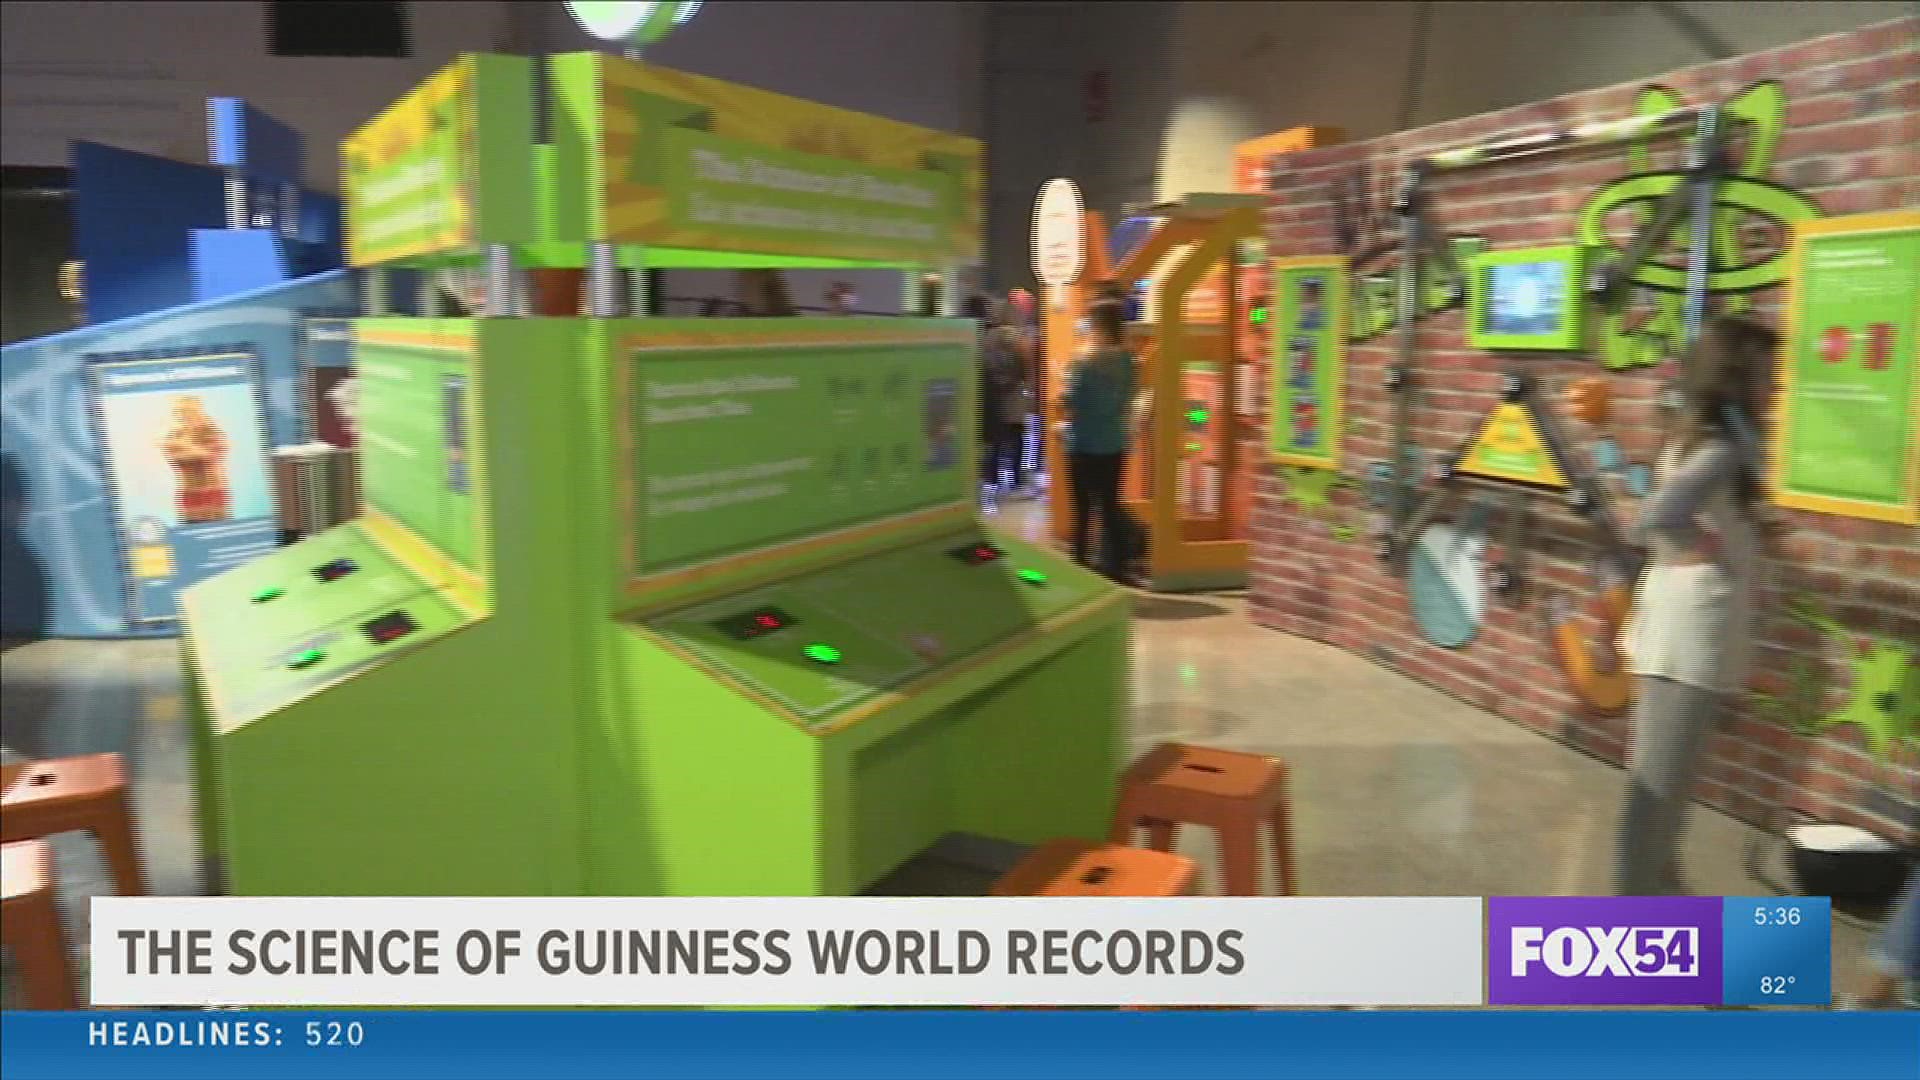 U.S. Space & Rocket Center opens 'The Science of Guinness World Records' exhibit.